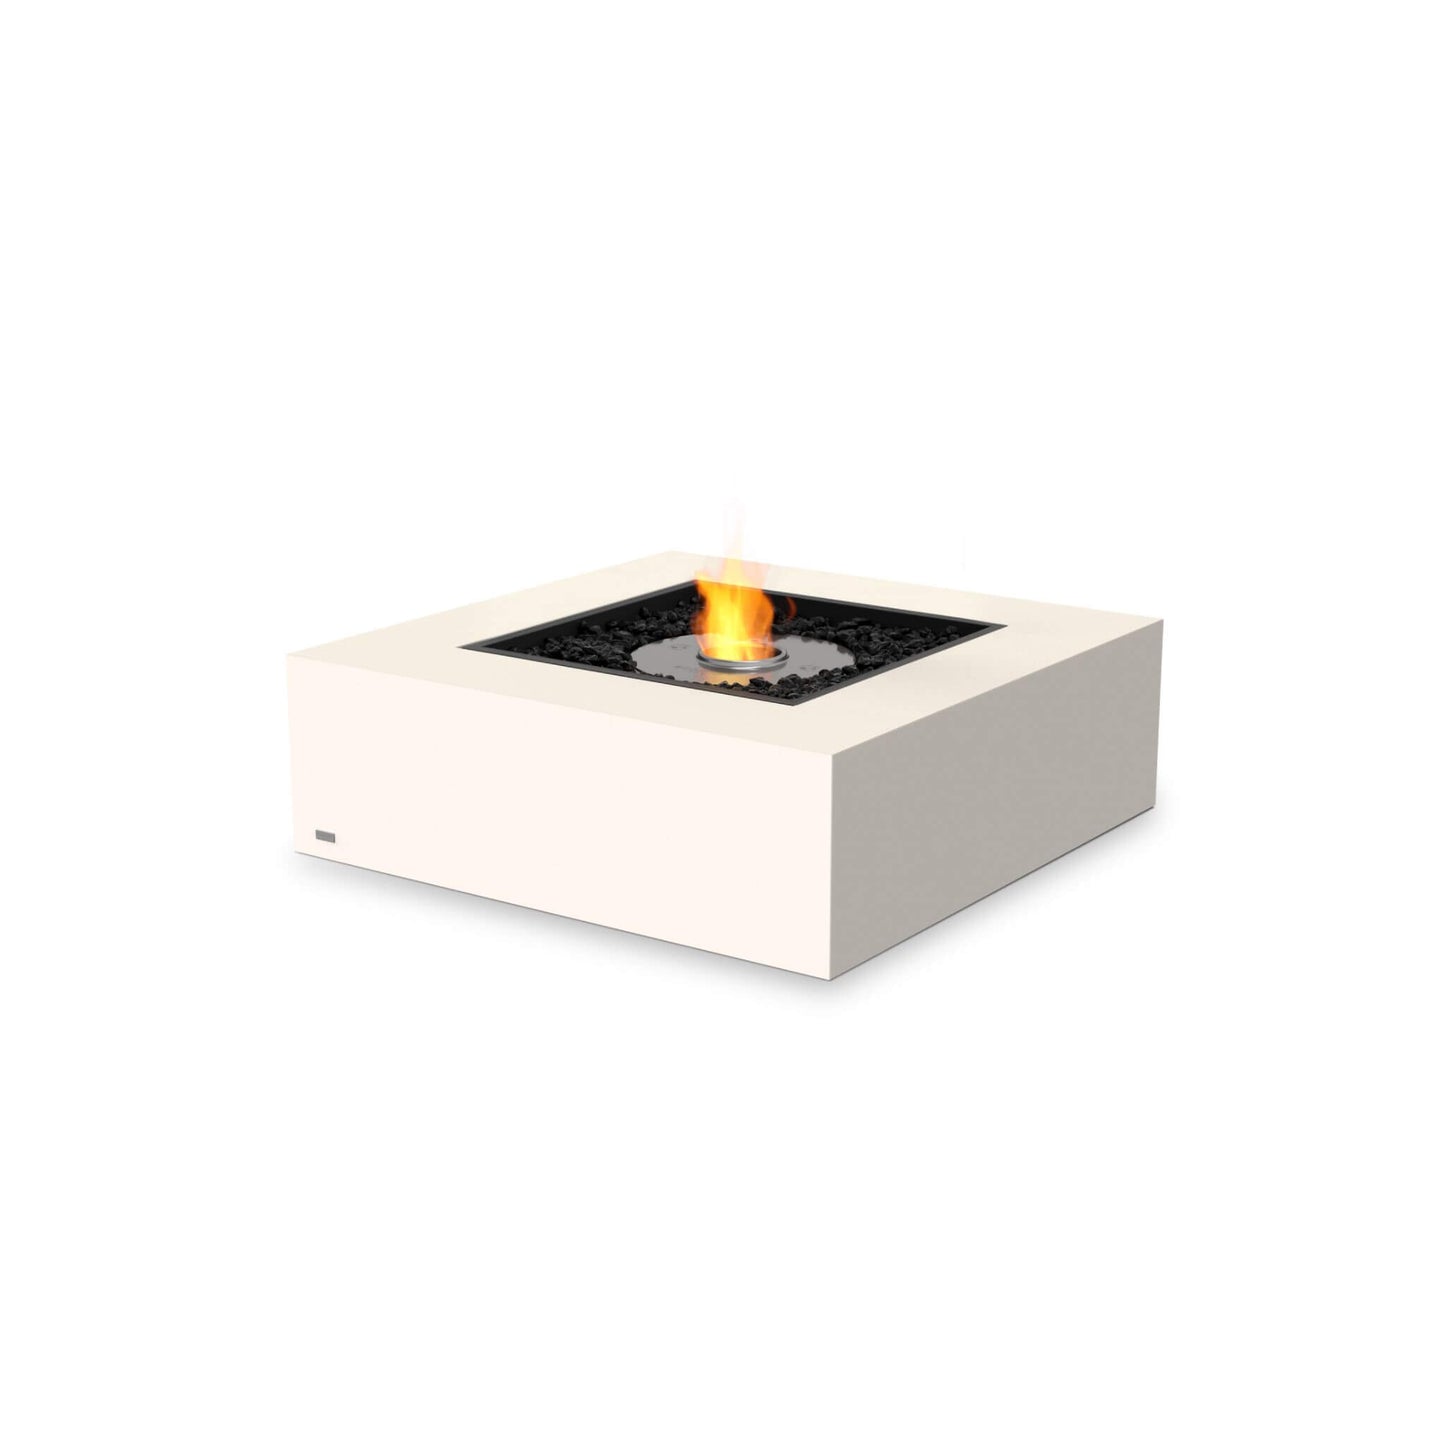 Base 40 Square Concrete Bio Ethanol Fire Pit Coffee Table for in Bone (white) Indoor & Outdoor Heating by Ecosmart Fire